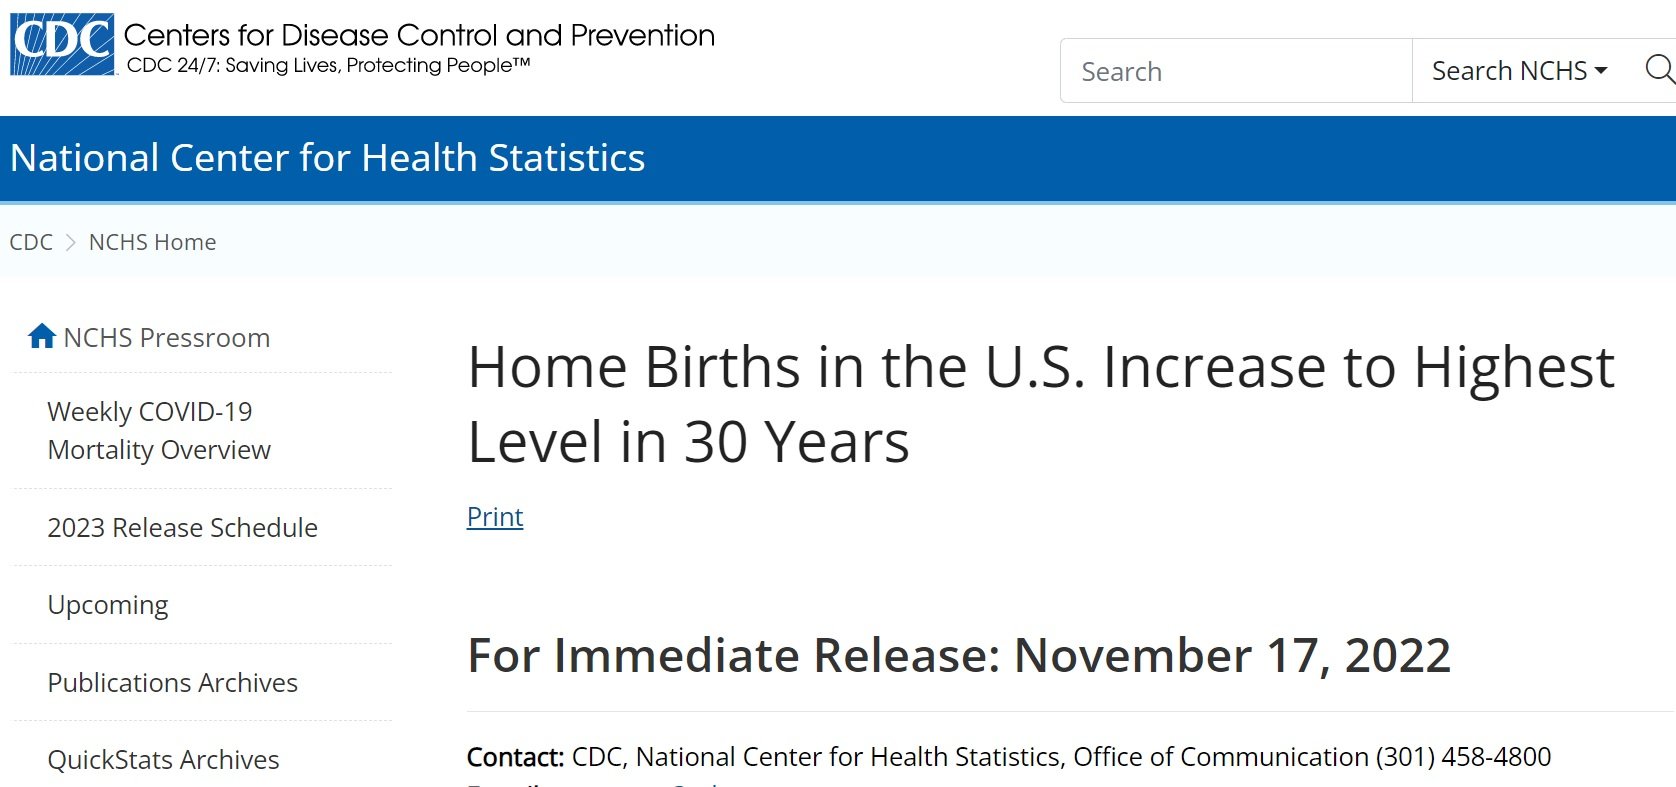 Increase in Home Births